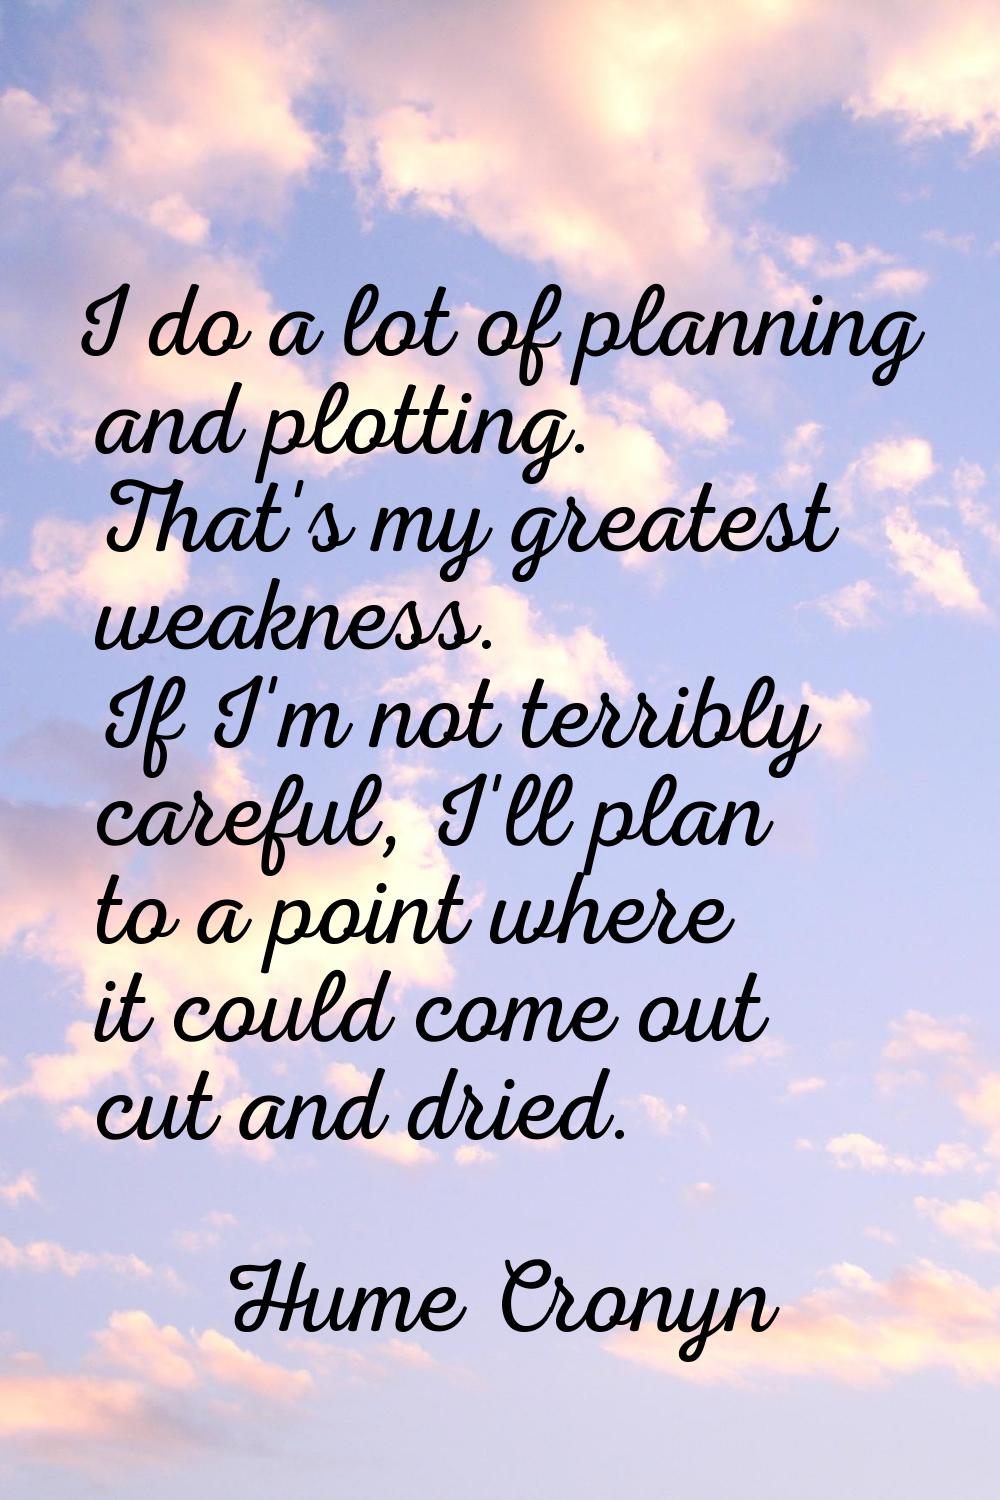 I do a lot of planning and plotting. That's my greatest weakness. If I'm not terribly careful, I'll